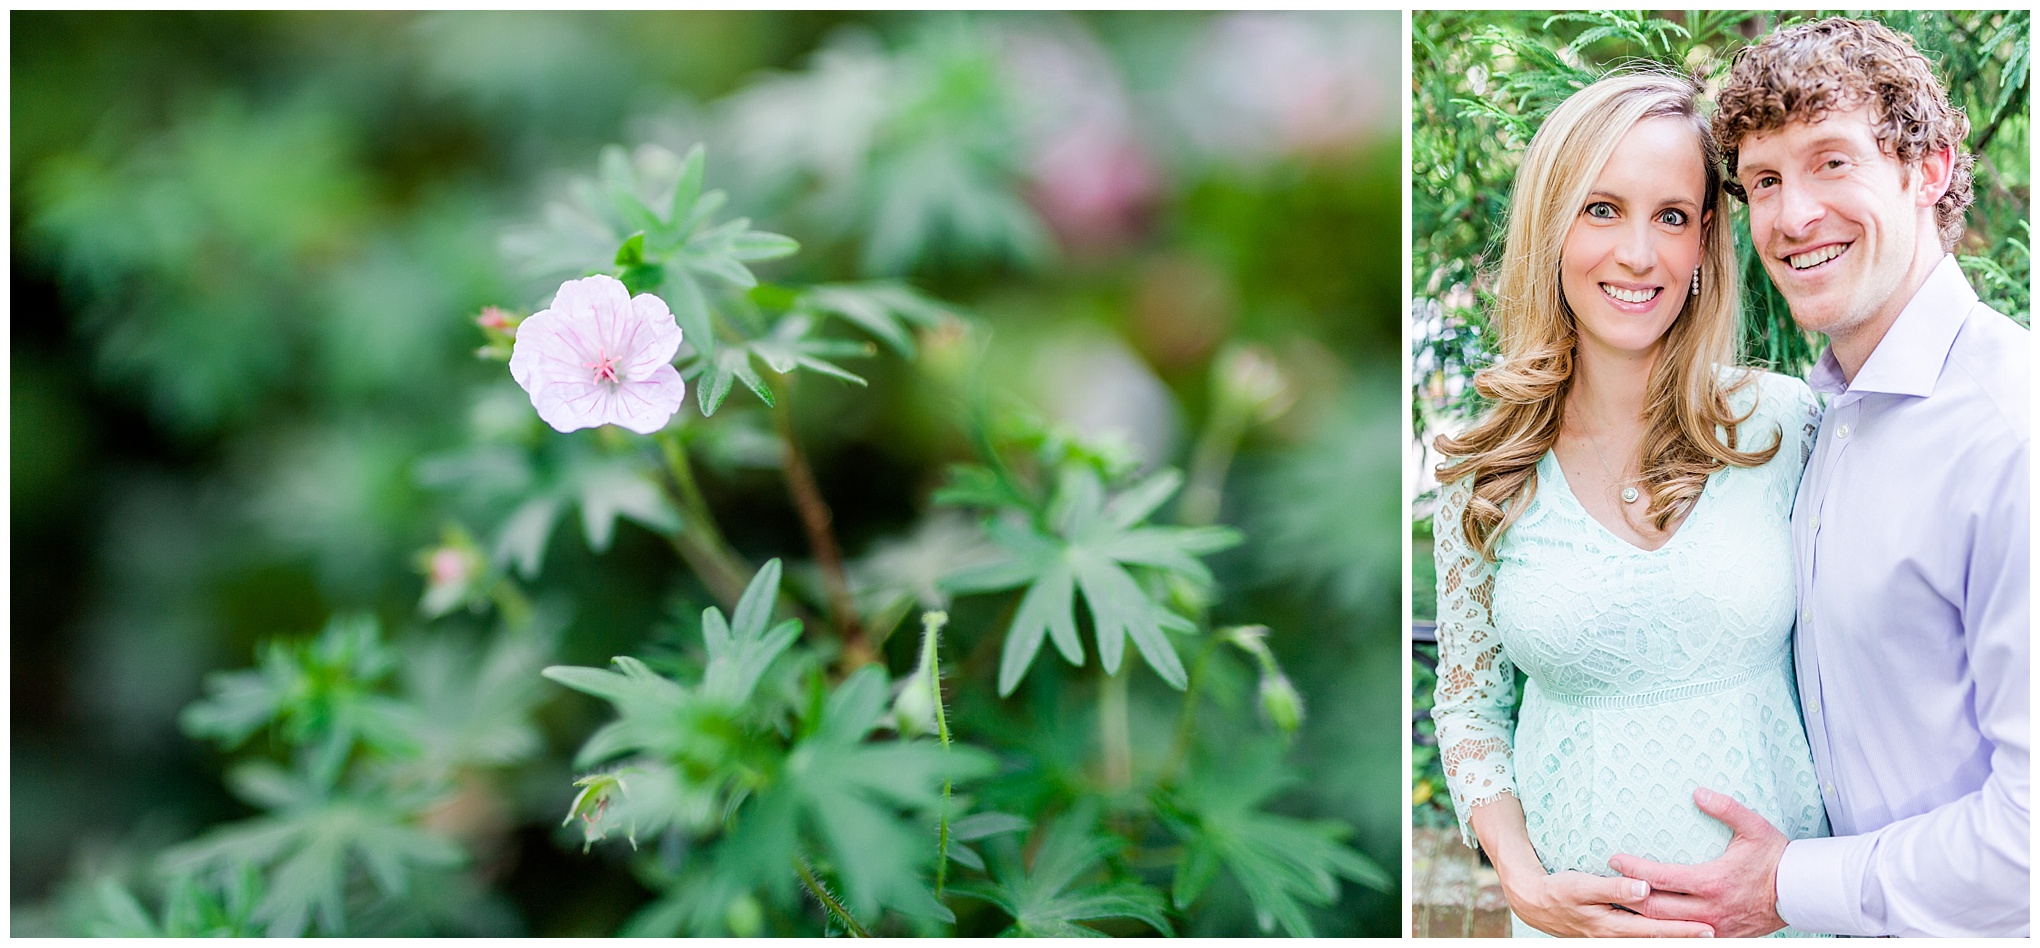 Georgetown maternity photos, married couple, pregnant woman, garden, baby bump